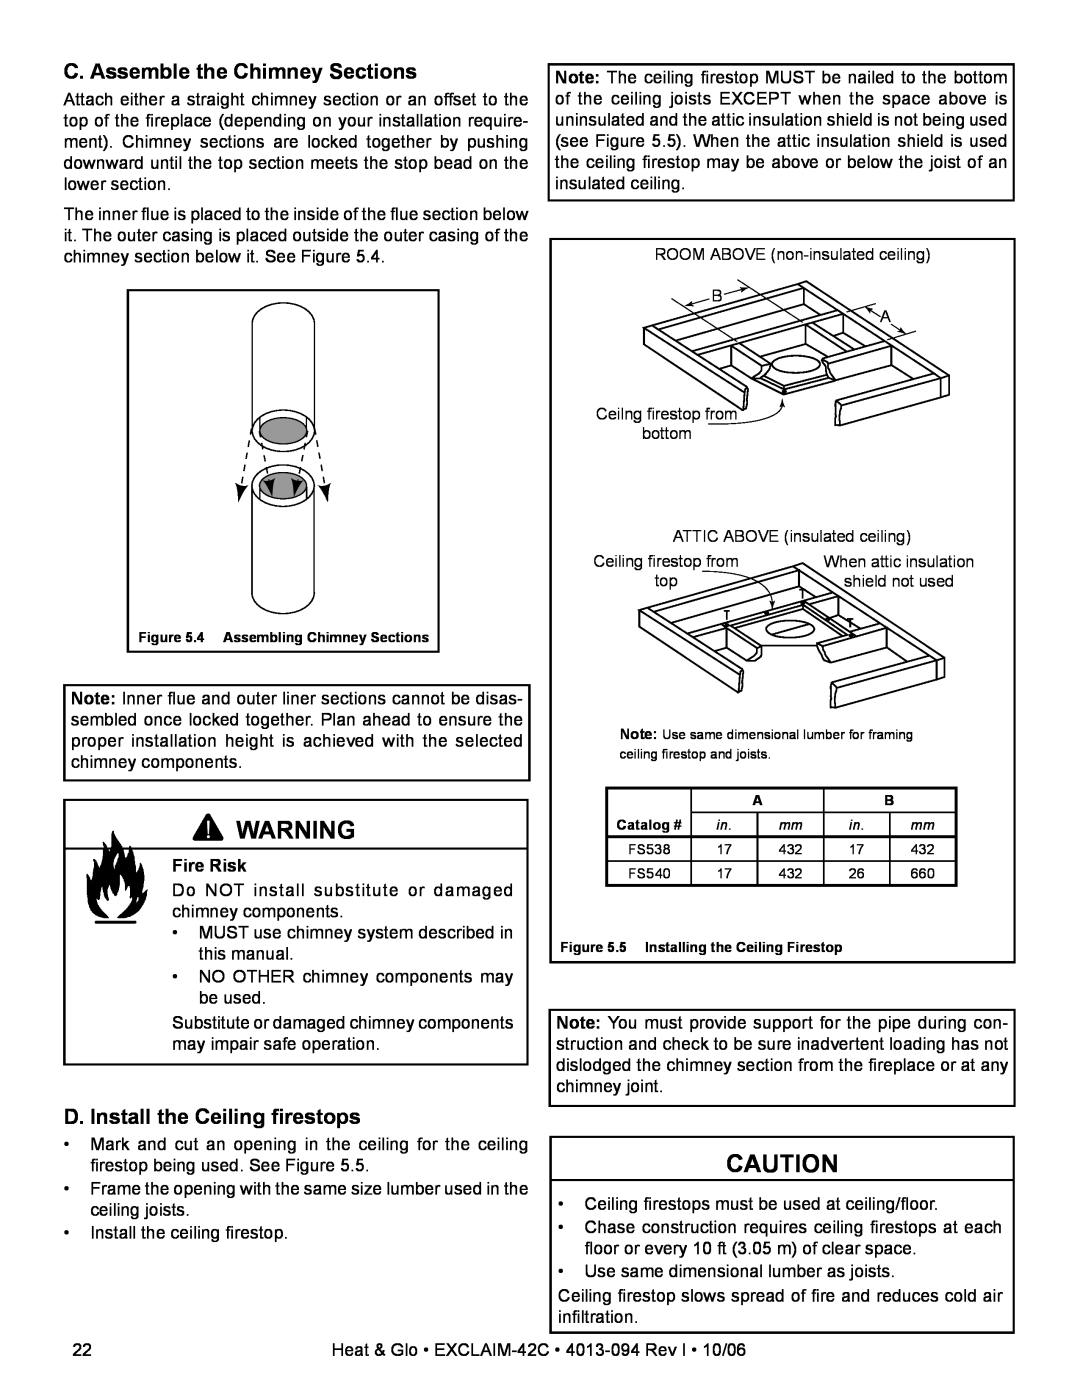 Heat & Glo LifeStyle EXCLAIM-42H-C C. Assemble the Chimney Sections, D. Install the Ceiling ﬁrestops, Fire Risk 